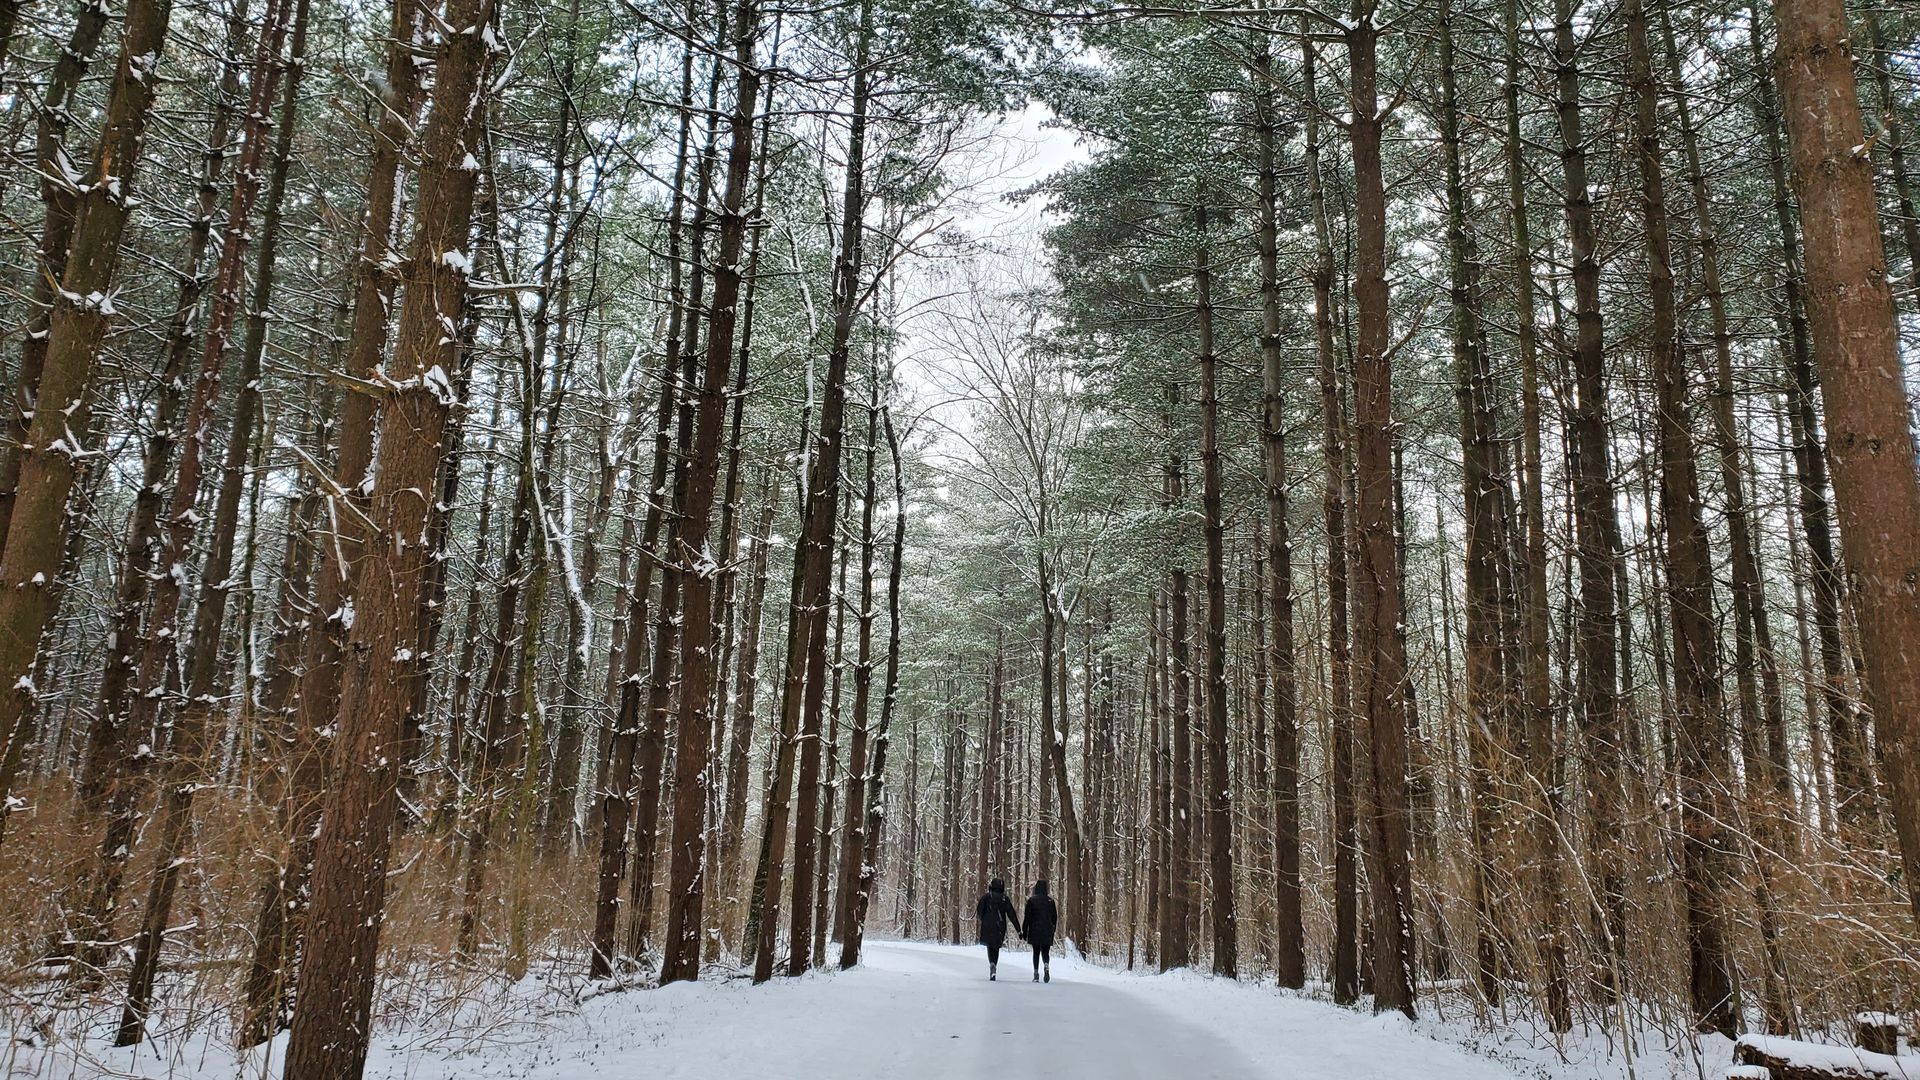 Two women in black winter coats walk on a snowy path among tall pine trees covered in snow